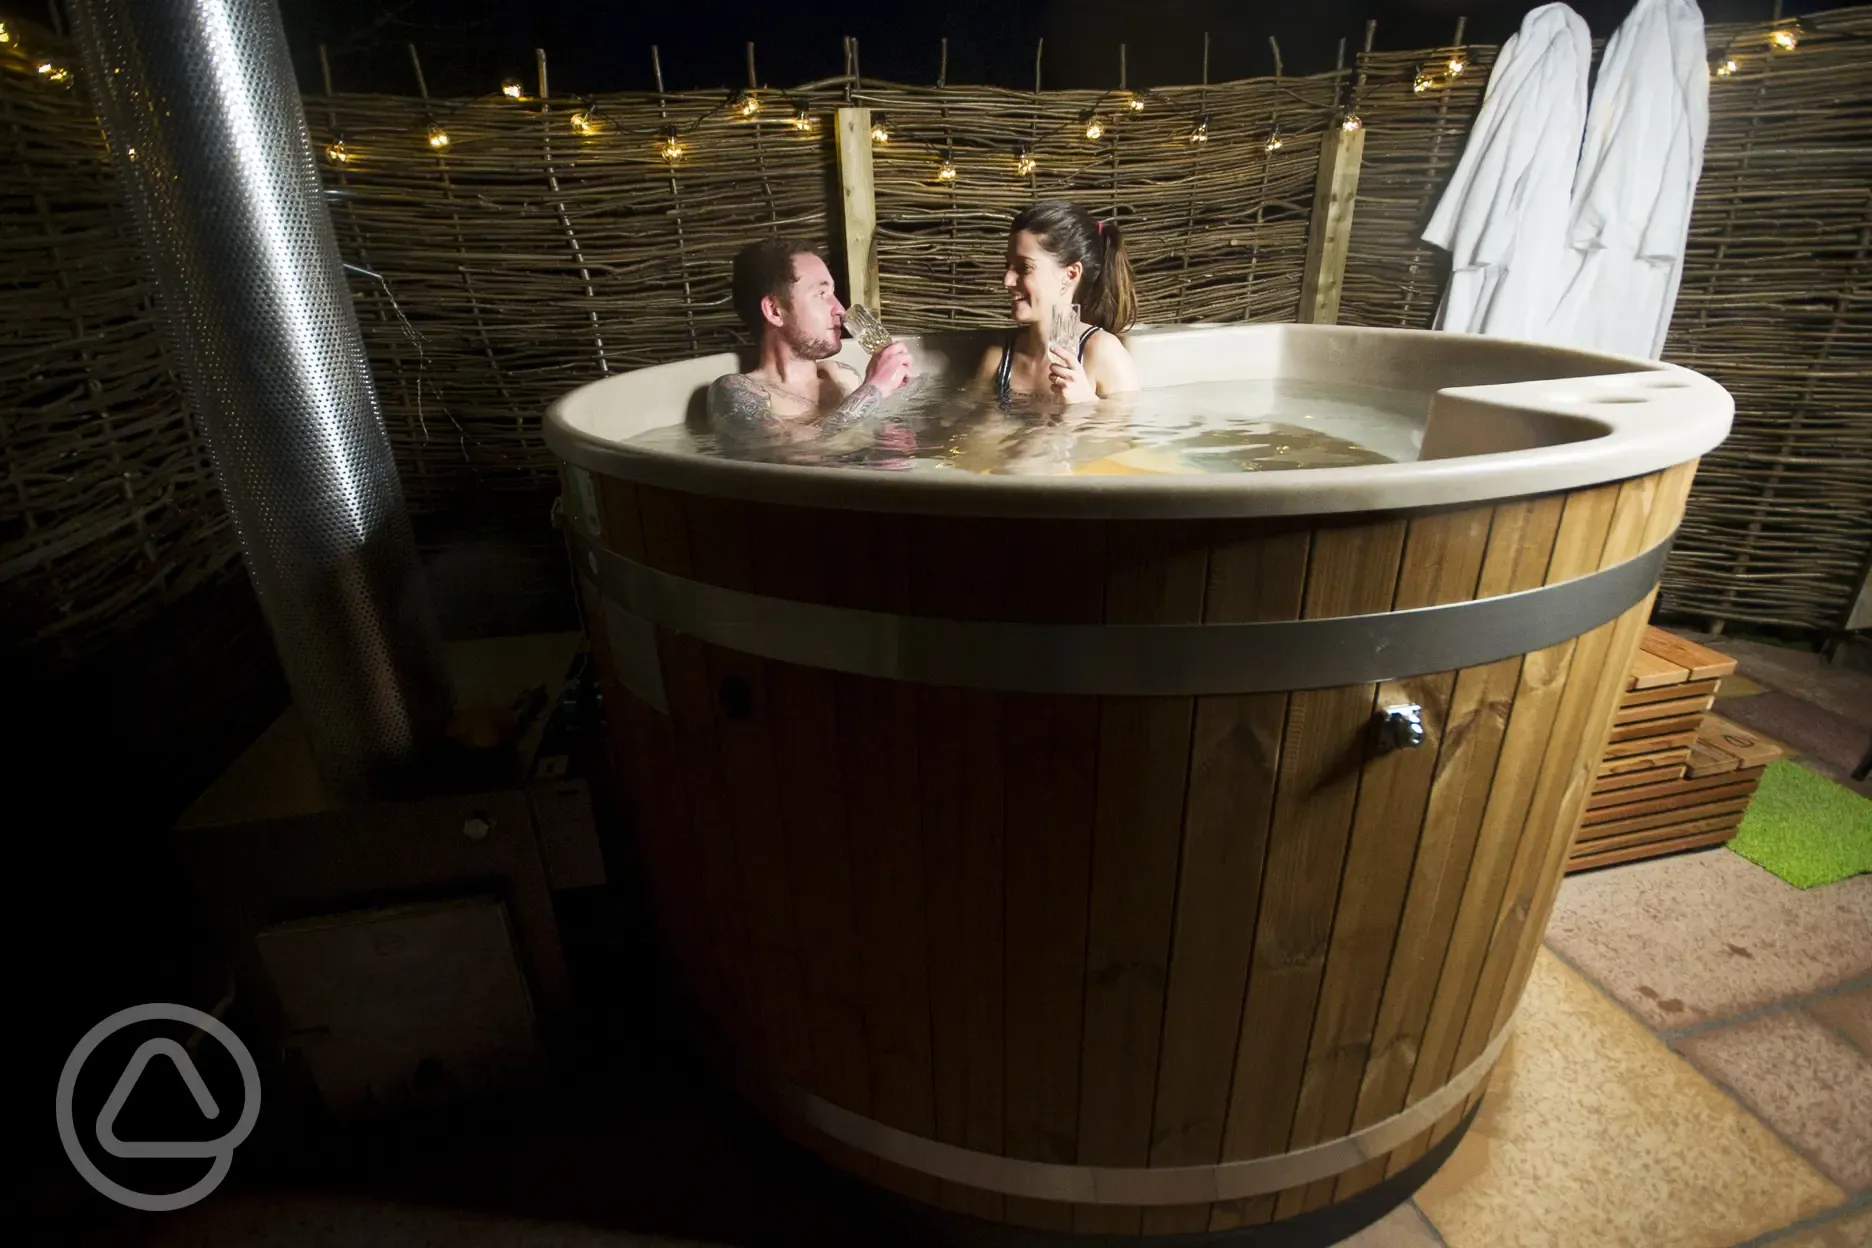 Optional four person hot tub at night